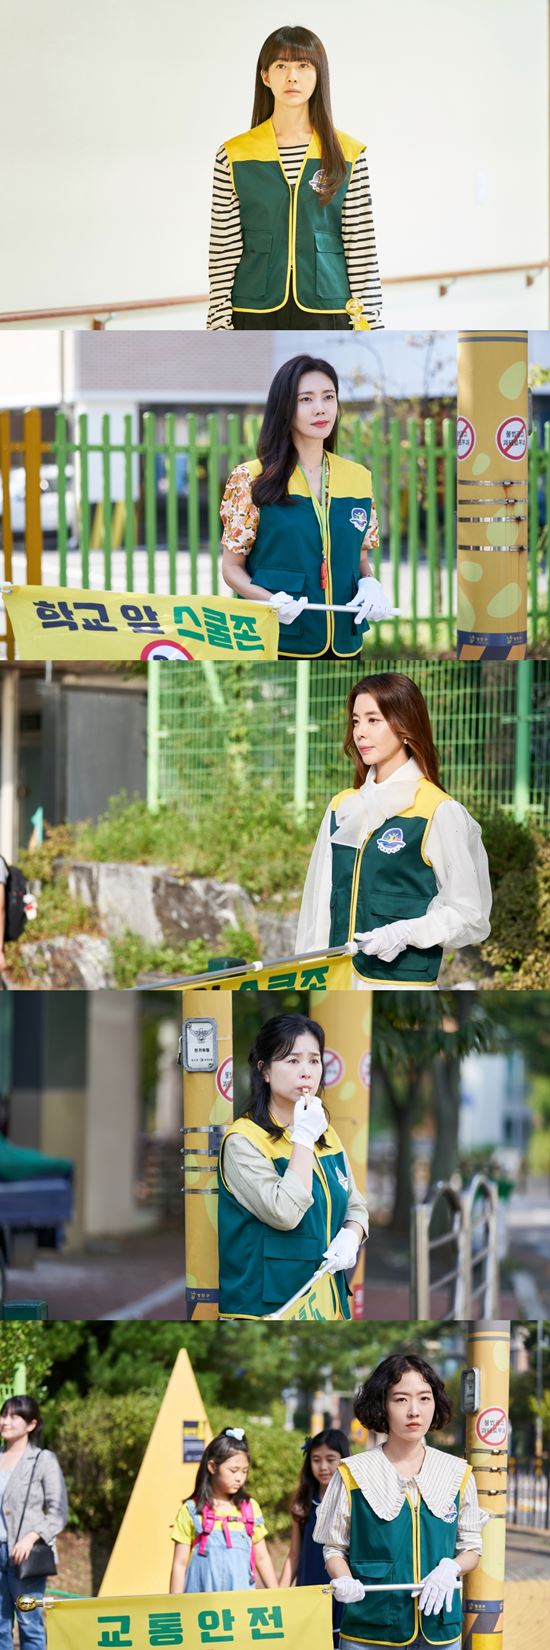 South Korea s moms green mother s club activity scene was captured.JTBCs new Wednesday-Thursday evening drama green mothers club, which is about to be broadcasted in April, is a drama depicting the dangerous relationship between elementary school people and local parents represented by green mothers society.I am curious about what story will be unfolded because I will express the Green Mothers Association, which has been a familiar image to us, as an elementary community where mothers intense psychological warfare is going on.Among them, the still released shows five mothers, Lee Eun-pyo (Lee Yo-won), Chang Chun-hee (Choo Ja-hyun), Seo Jin-ha (Kim Kyu-ri), Kim Yeong-mi (Jang Hye-jin), and Park Yun-joo (Ju Min-gyeong), who are engaged in the activities of the Green Mothers Association. It makes the mood of the air guess.First, Lee Eun-pyo, a highly educated mother from France, shows an awkward appearance even though she wears a green uniform, a symbol of elementary community members.Her psychology, where all the environments of the new place are unfamiliar, is seen.On the other hand, Chun-hee, the number one ranking member of elementary community, boasts a veterans face with a familiar flag and a relaxed expression.Her force, which has long dominated the reality of elementary community, feels beyond the screen.In addition, Seo Jin-has smile, which emits an elegant aura that can not be covered by ordinary green uniforms, attracts attention.Kim Yeong-mi, who has a whistle in his mouth with sharp eyes as if he would not tolerate any violation of the rules, and Park Yoon-joo, who is showing up during the Green Mothers Association, is also interested.Even with the flags, the five mothers whose individualities are clearly visible are amplifying their exciting curiosity about how they will become entangled in the bloody elementary community called Green Mothers club.In addition, wearing the same green uniform, sharing similar concerns about the child, and expecting the different kinds of men who will get closer to each other without knowing themselves.JTBCs new Wednesday-Thursday Evening drama green mothers club will be broadcast for the first time in April, when a detailed psychological battle of five-color mams in a bloody elementary community that can not be avoided by South Korea mothers will take place.Photo = JTBC Studio